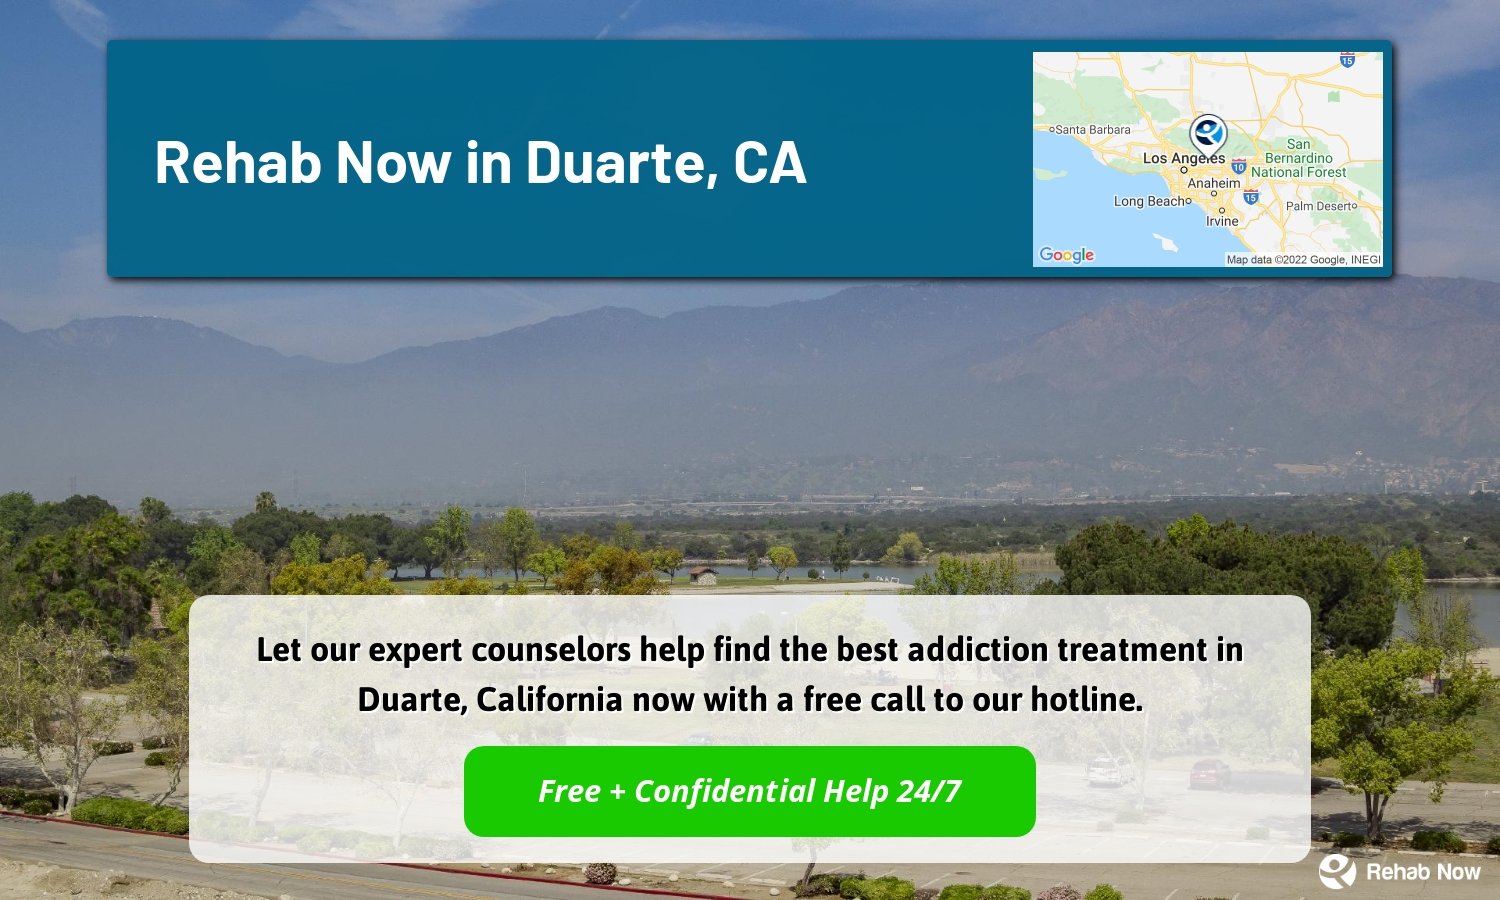 Let our expert counselors help find the best addiction treatment in Duarte, California now with a free call to our hotline.